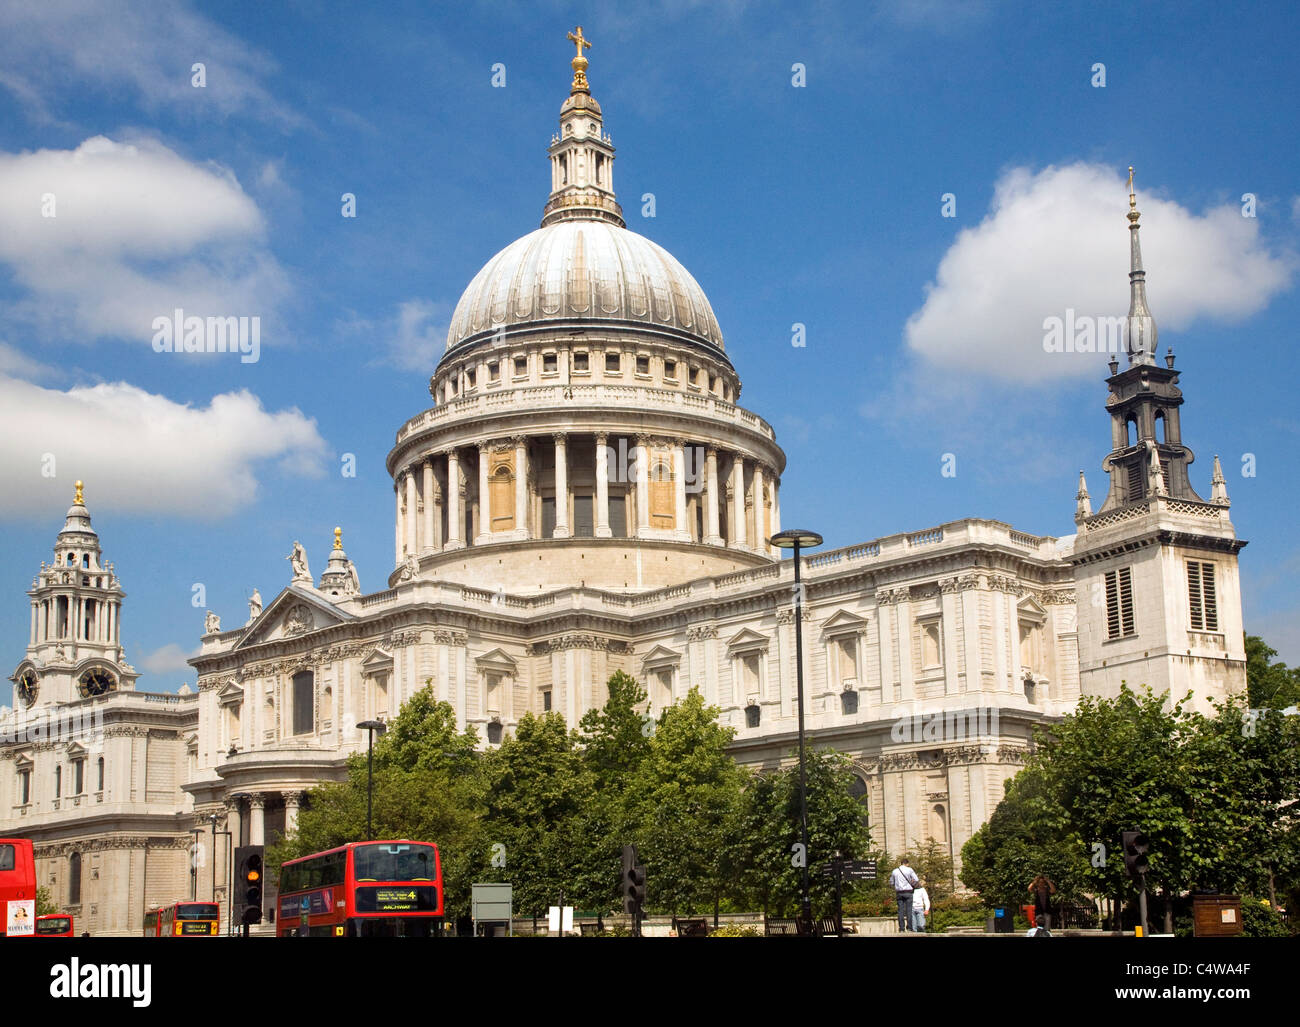 View of St Paul's cathedral Cannon Street, London Stock Photo